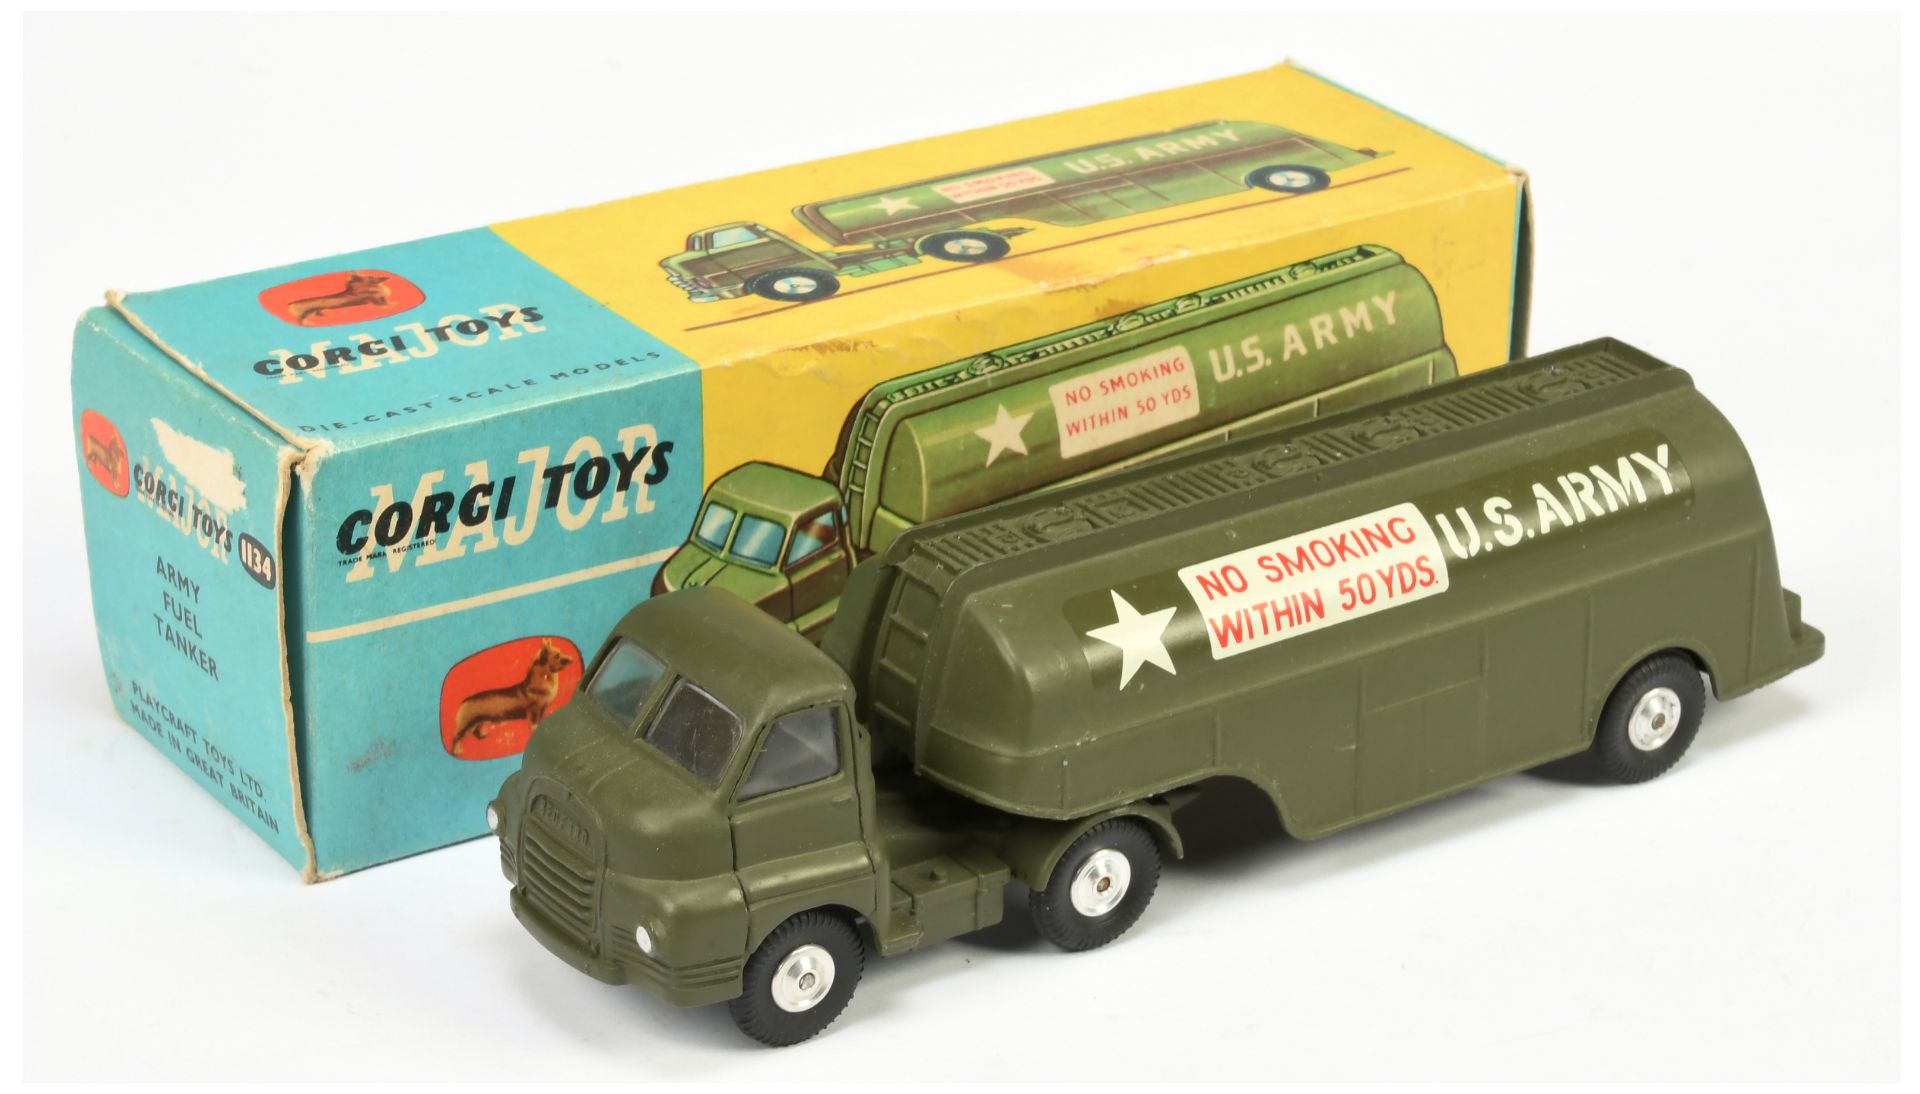 Corgi Toys 1134 Bedford Type S Articulated Military Tanker "US ARMY" - Drab Green Cab, tanker, fi...